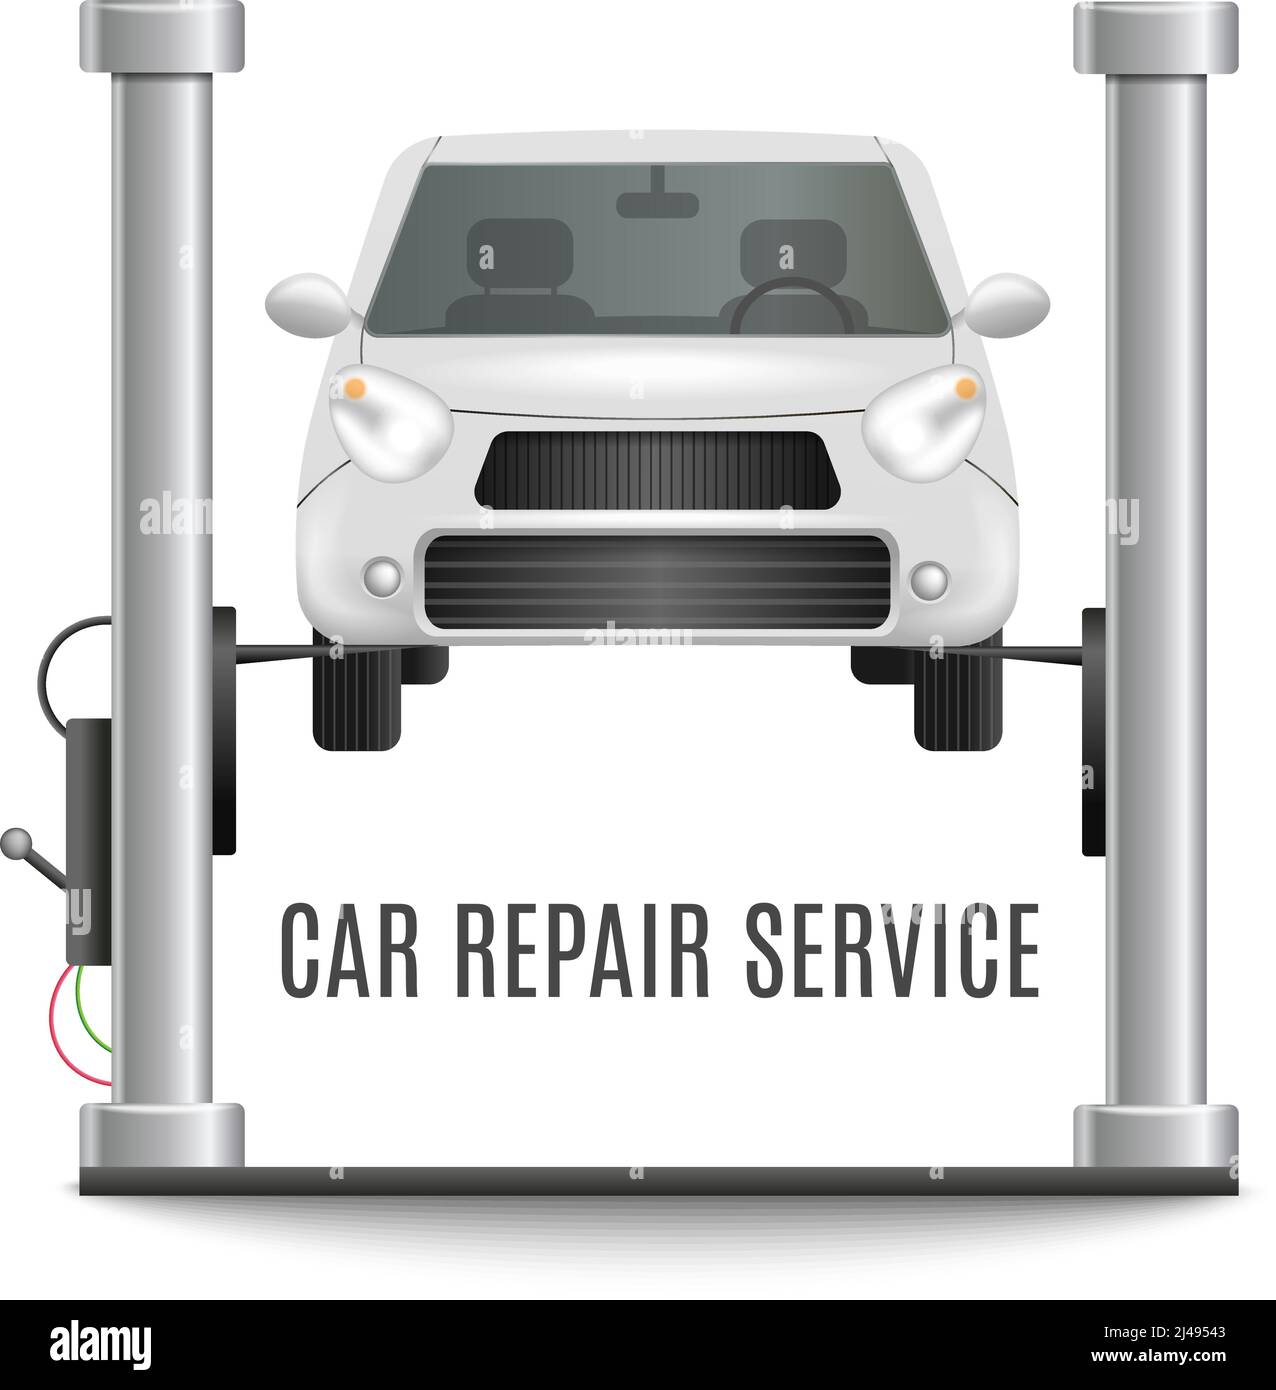 Car repair realistic composition with front view image of auto lift platform with car and text caption vector illustration Stock Vector